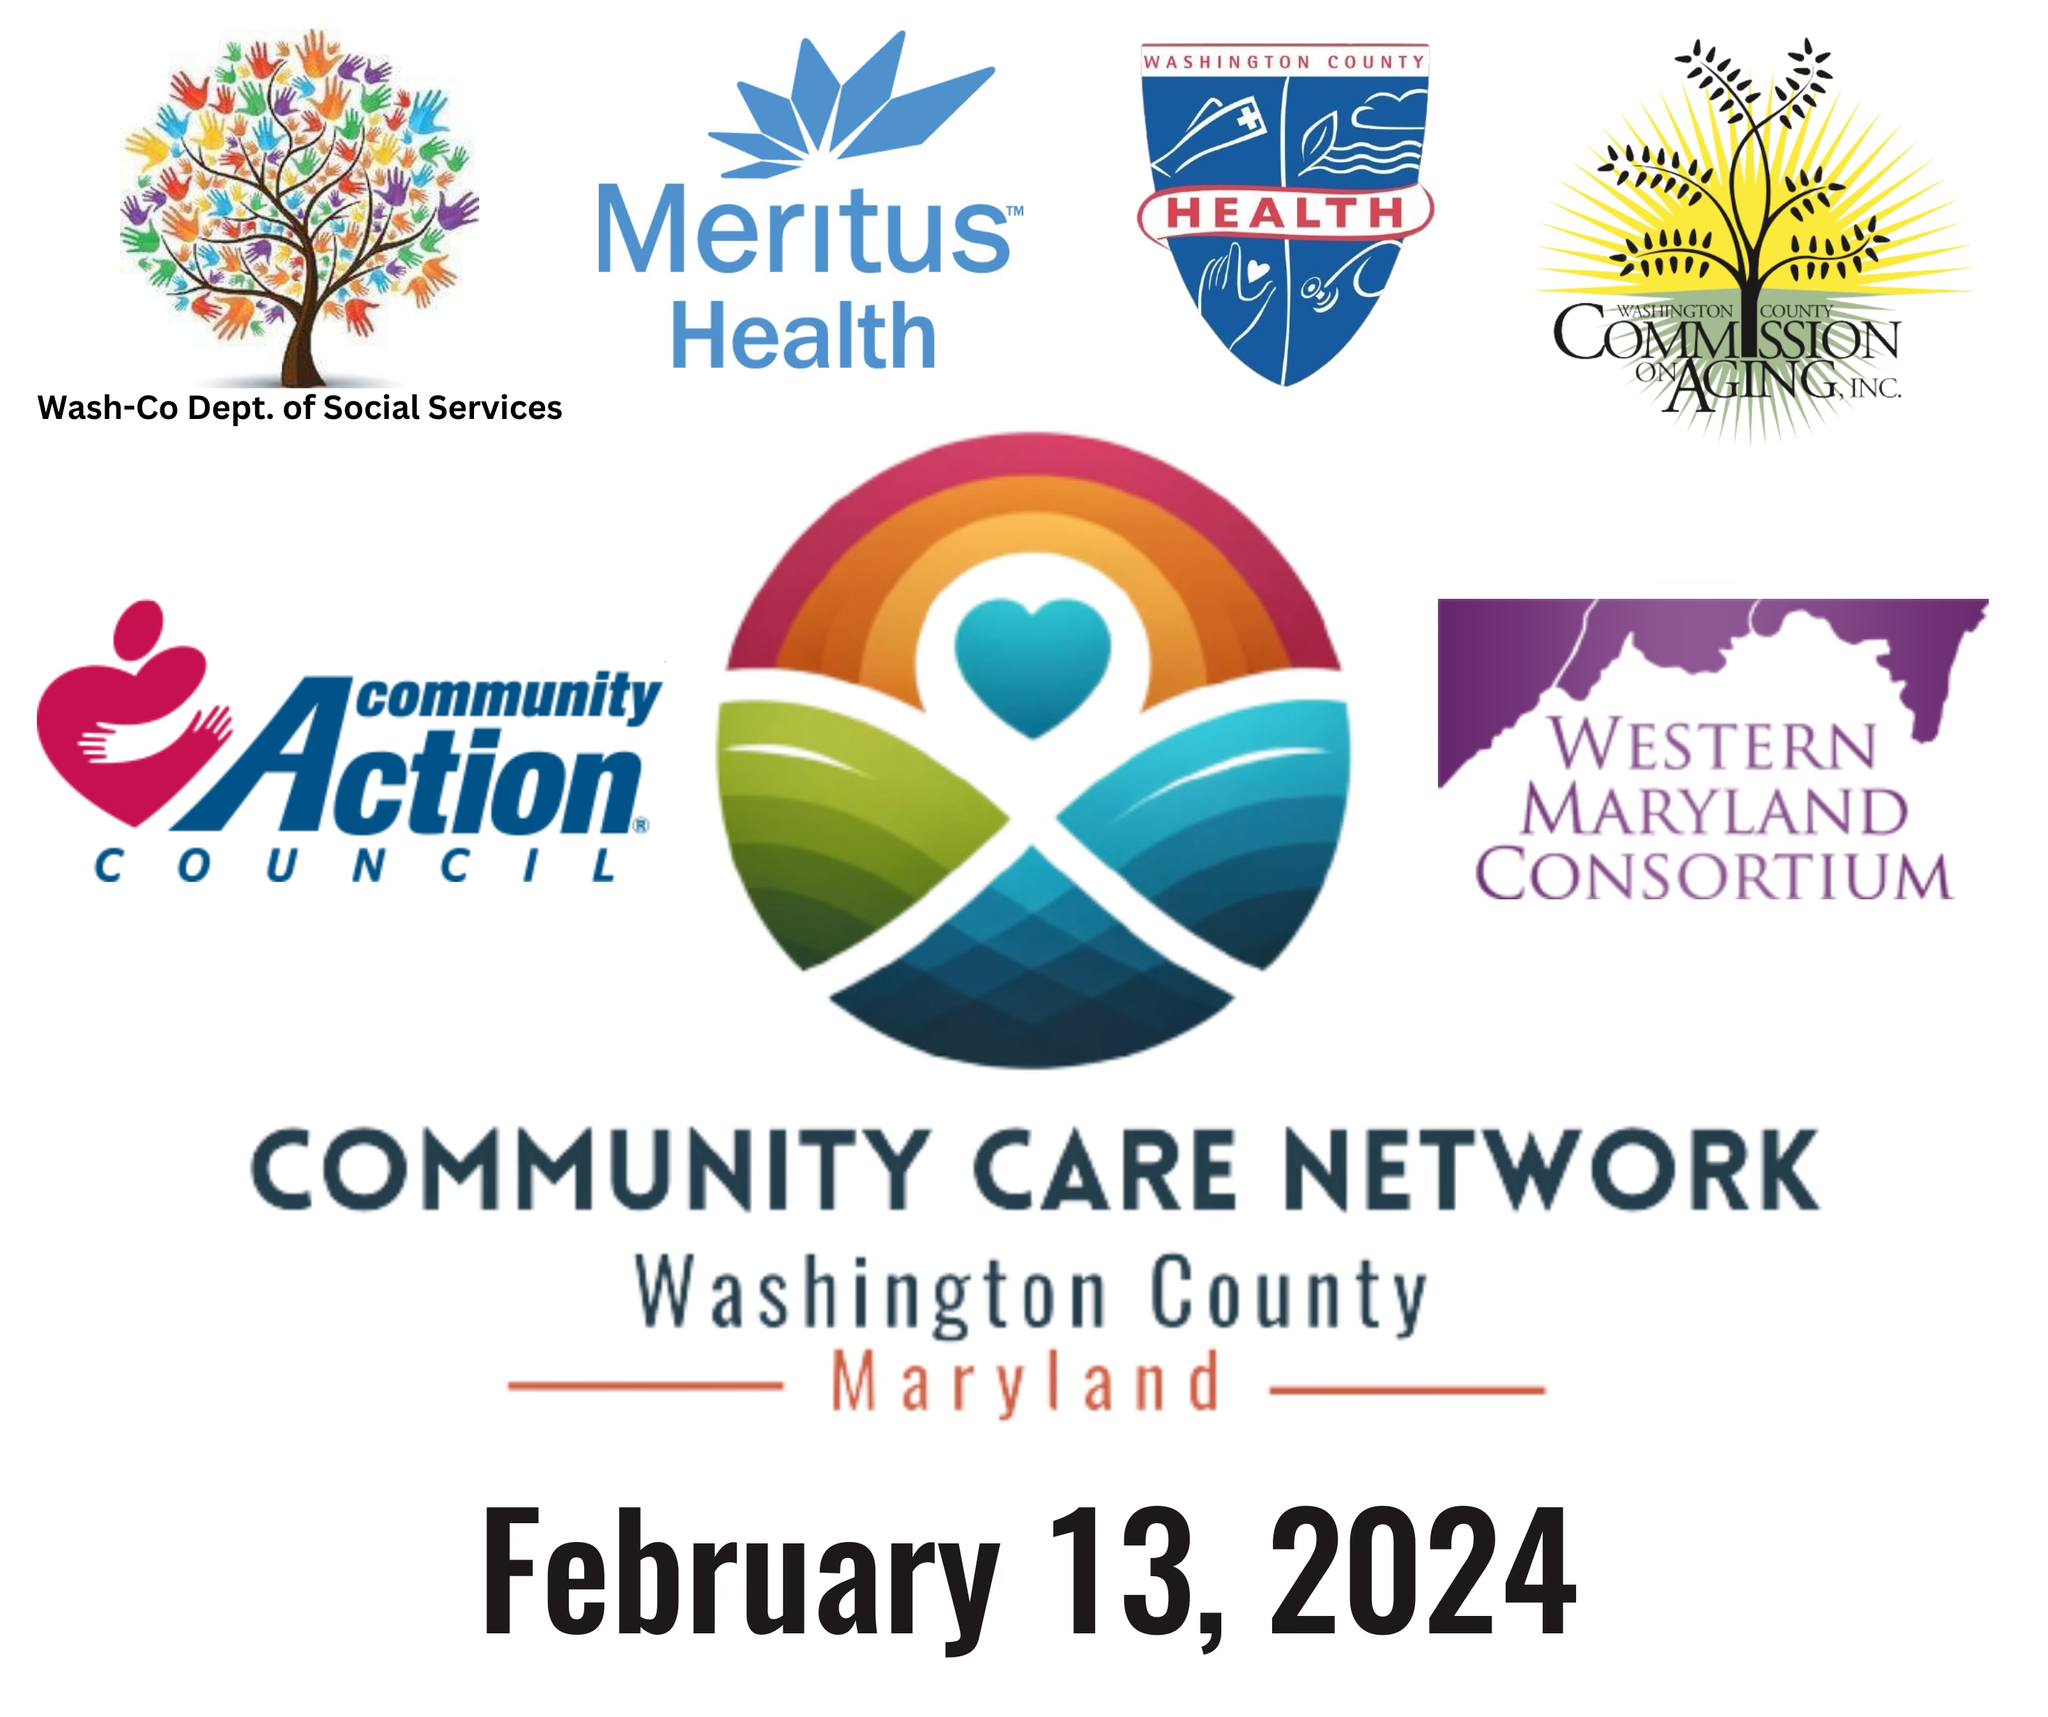 Image: Community Care Network Washington County Maryland art; white box with partner logos including health dept; Feb. 13, 2024, date is included as next event date